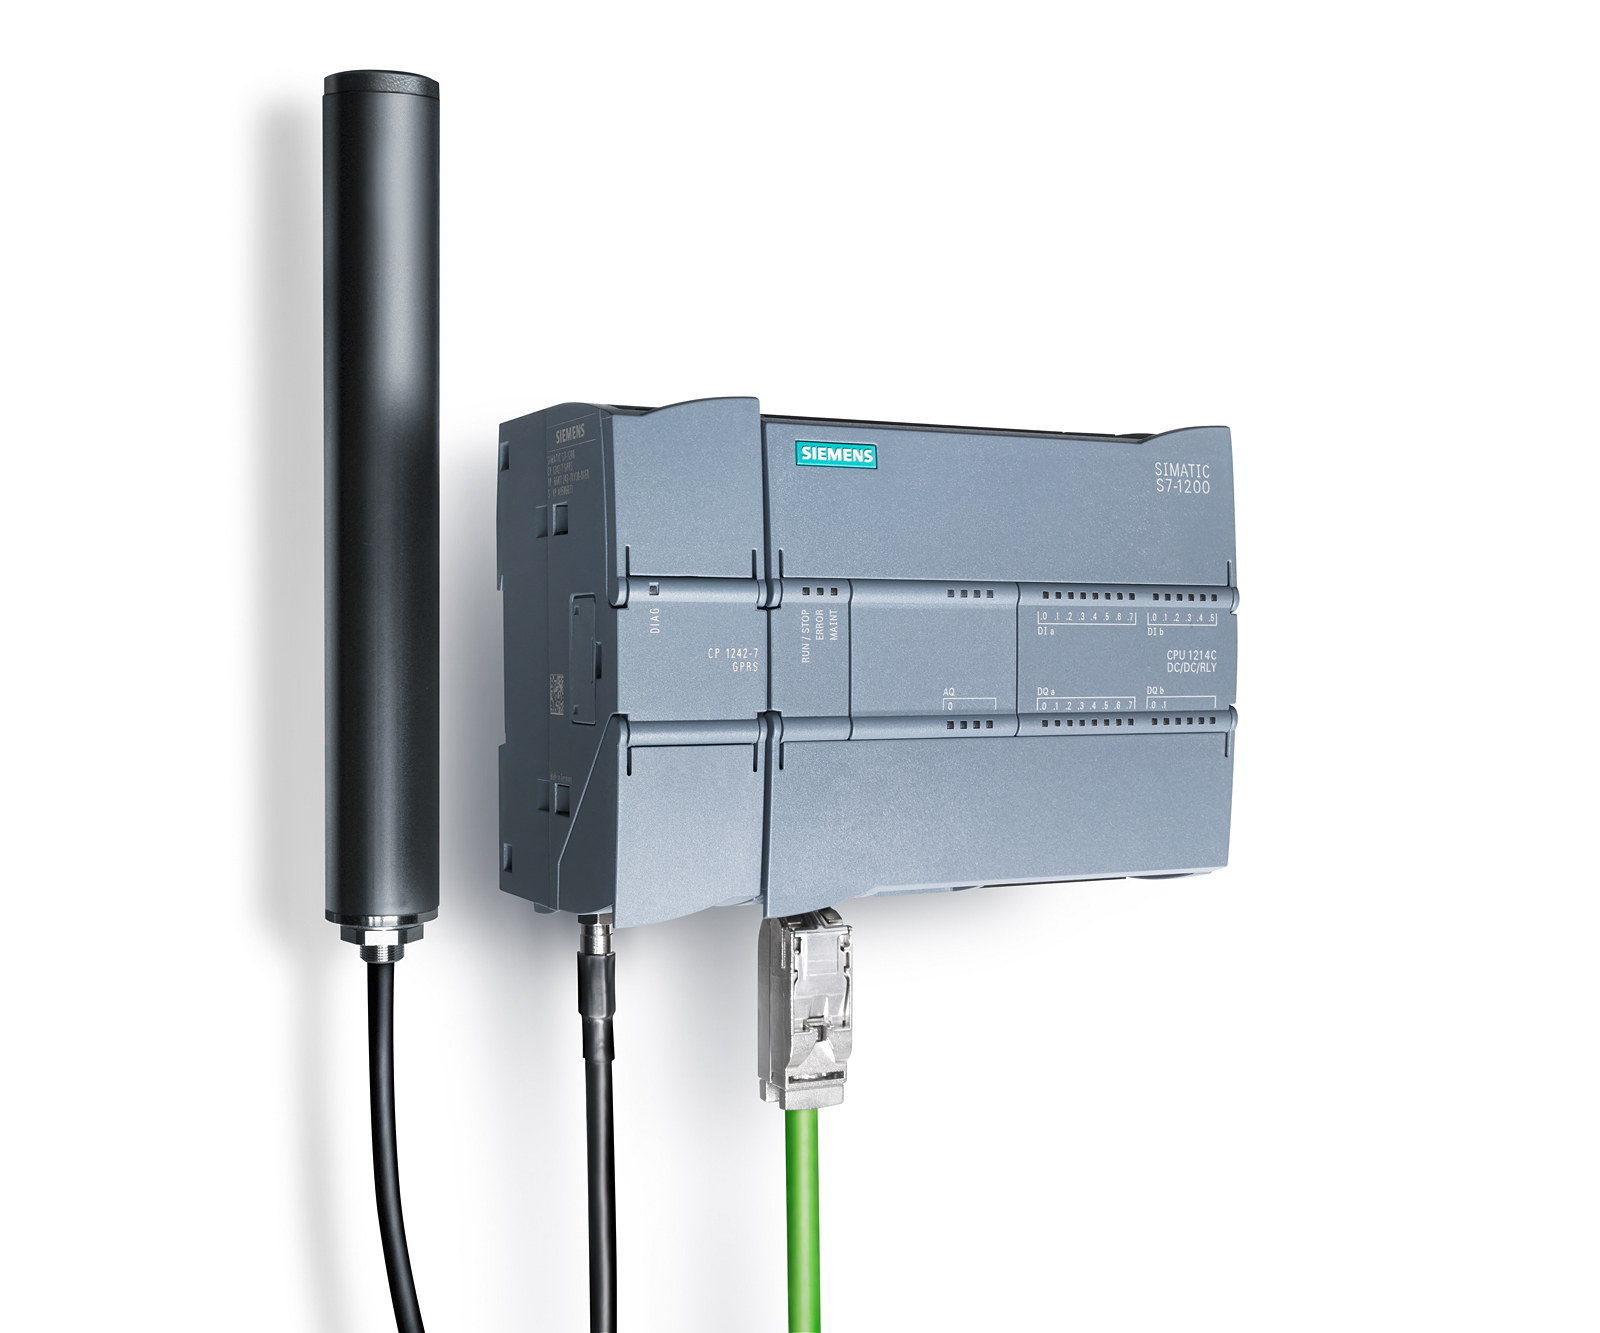 Fugtighed Fra Ray Sales release GPRS communication module for S7-1200 - ID: 55325363 -  Industry Support Siemens